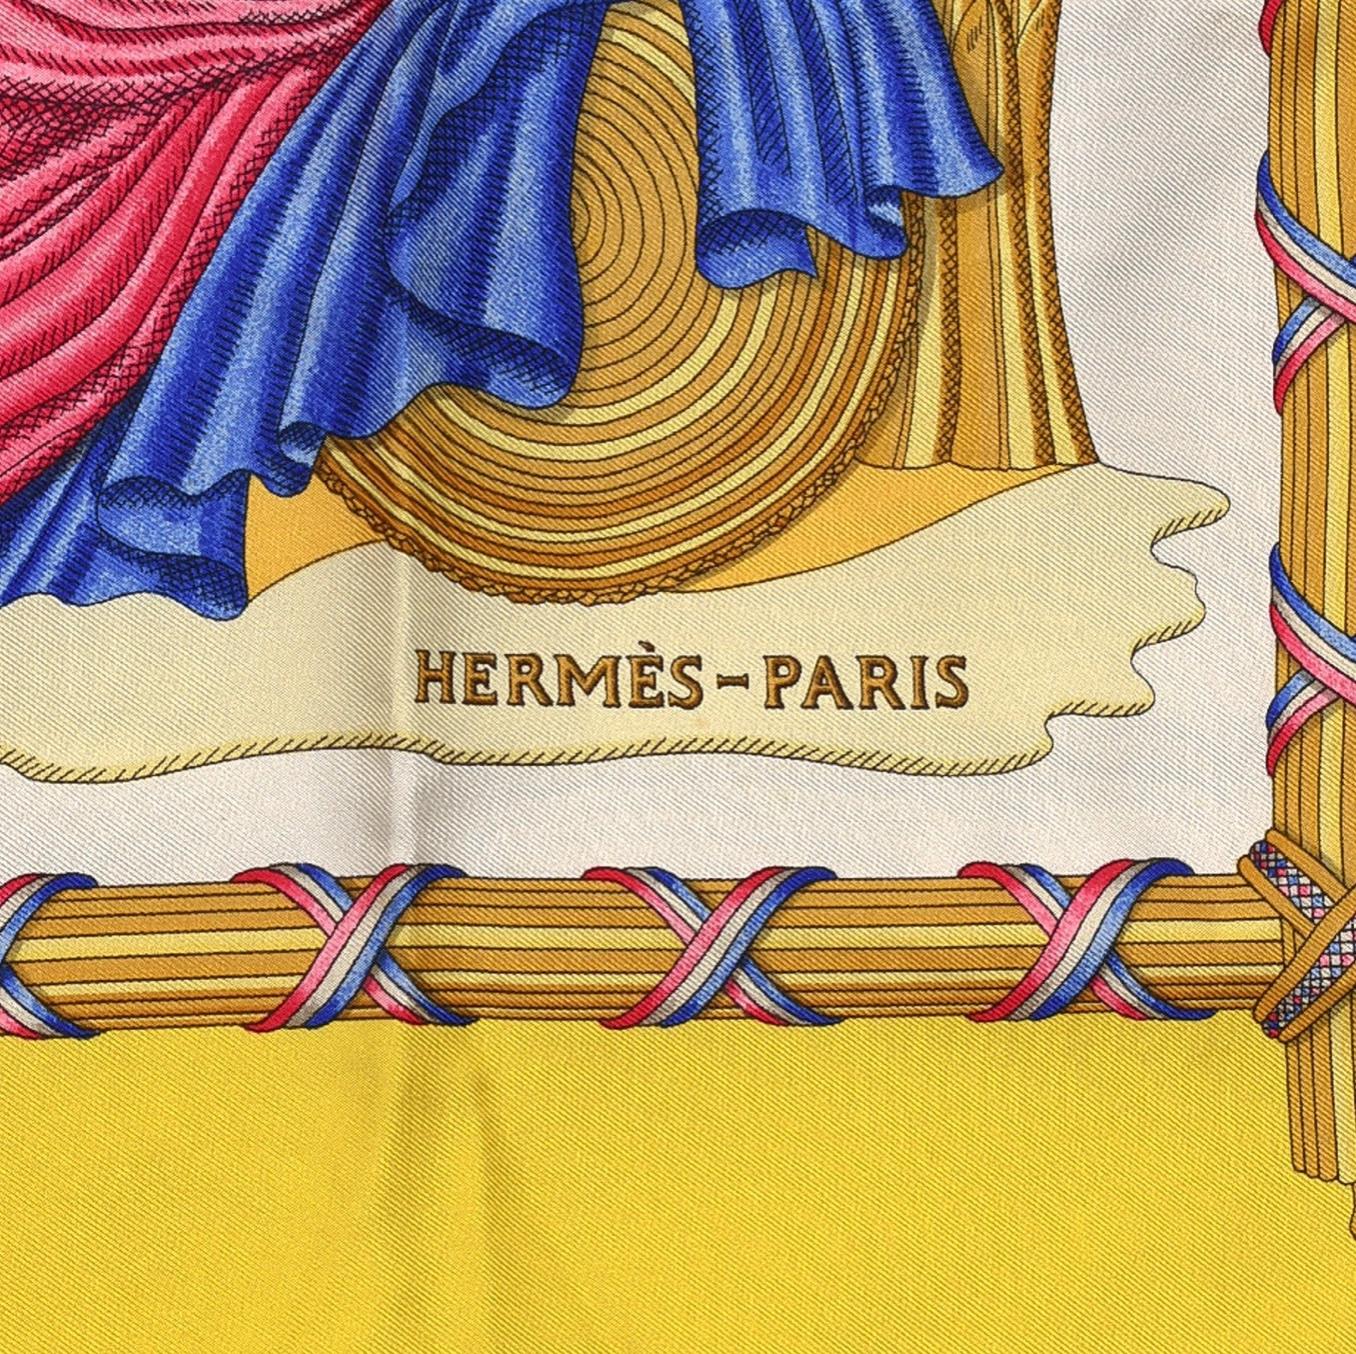 COLOR: Yellow
MATERIAL: Silk
MEASURES: 35” x 35”
COMES WITH: Box
CONDITION: Good - light stains and pulls on fabric.

Made in France